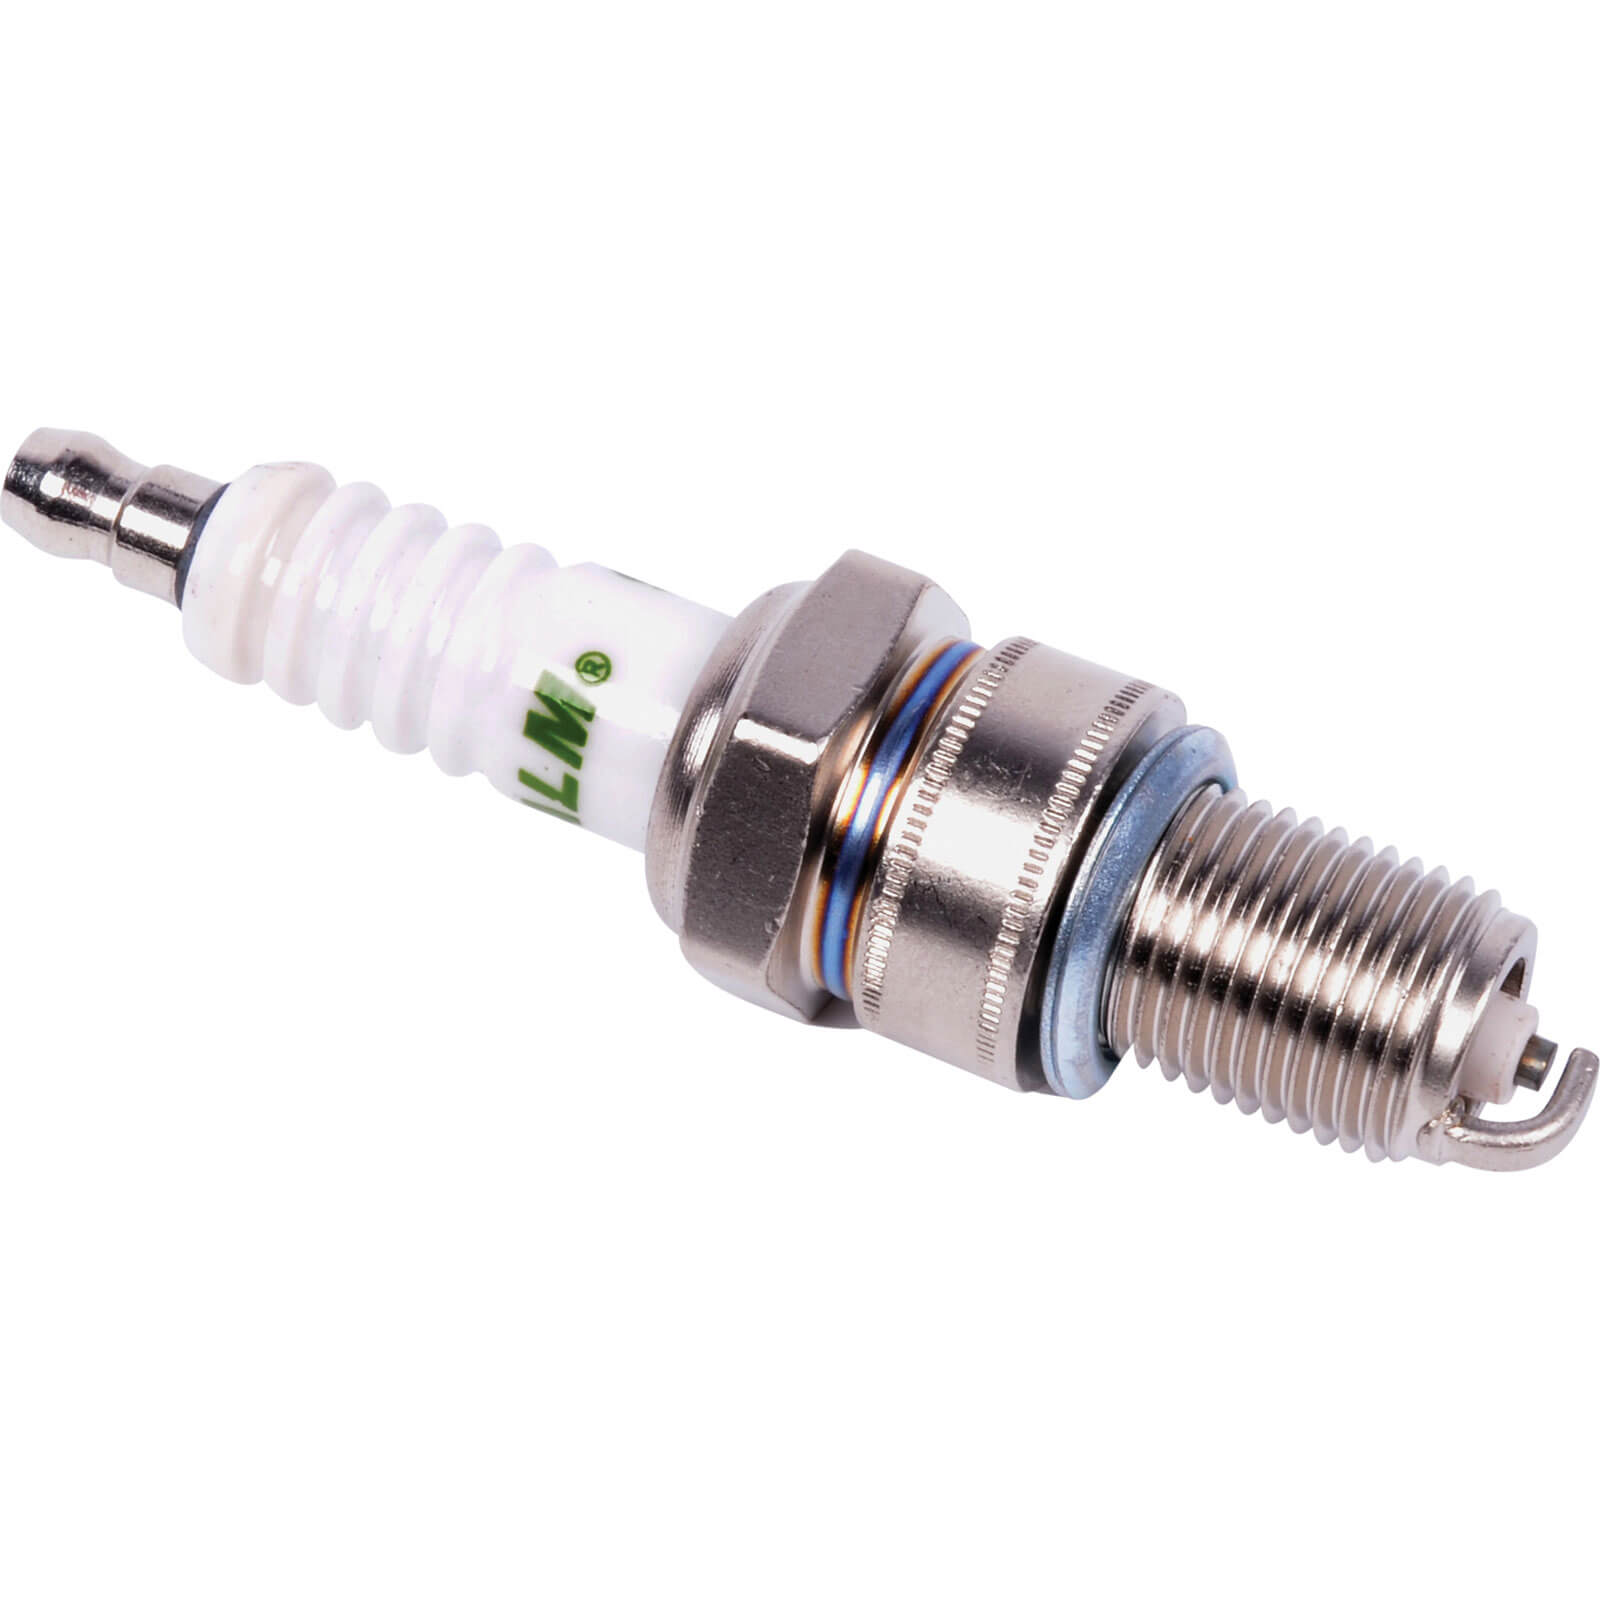 Image of ALM RN9YC Spark Plug for Honda and MacAllister Lawnmowers